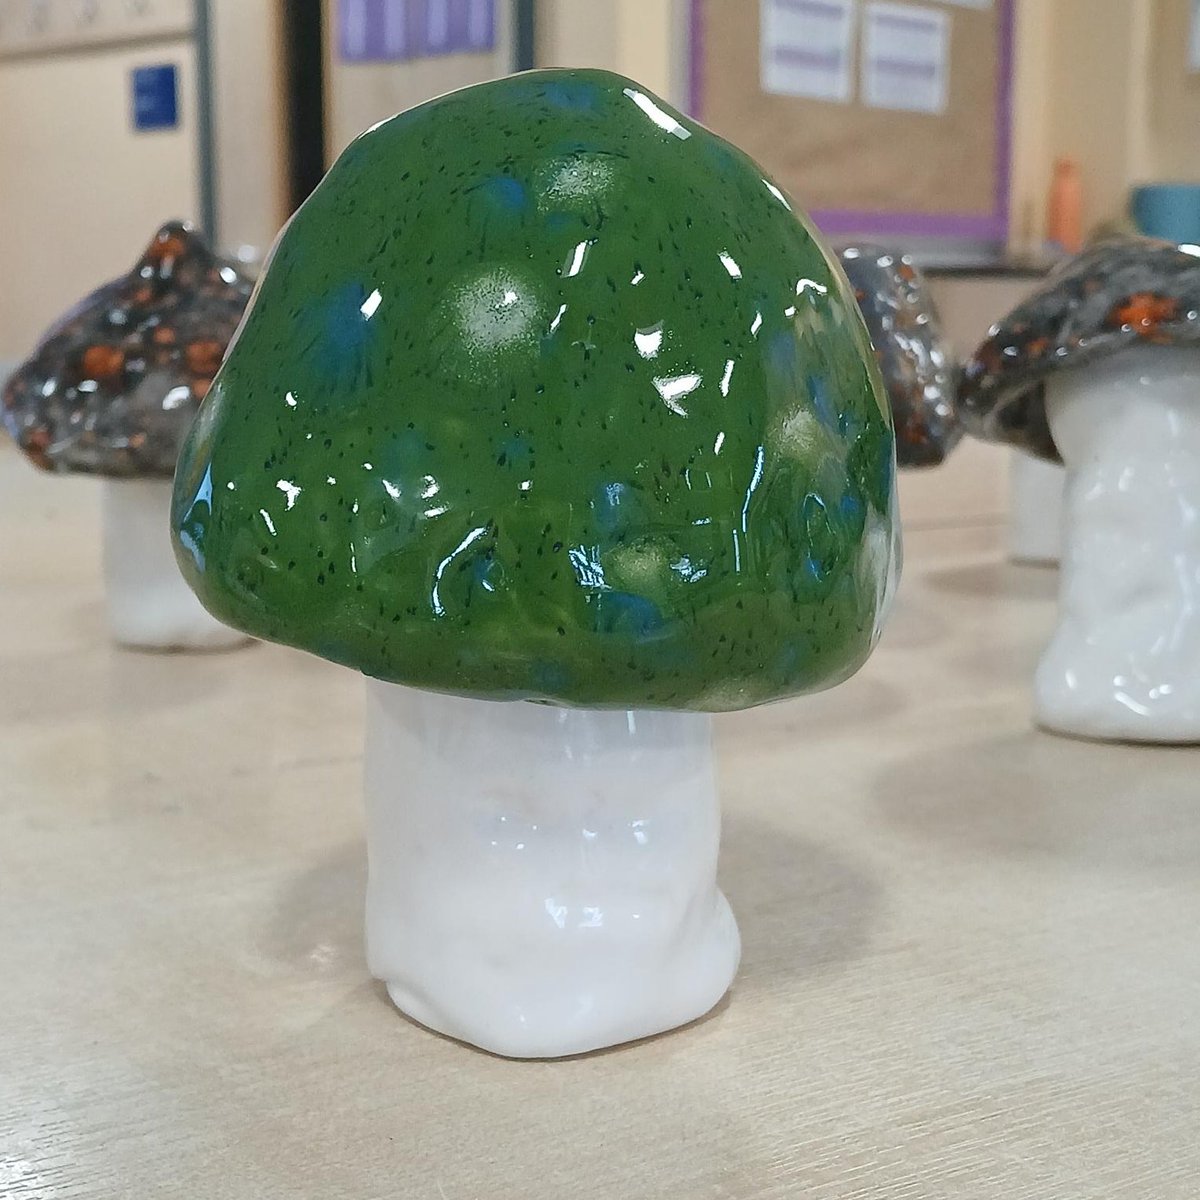 We are getting very excited about our annual Farmers market on Friday 19th April 10-11.30am. The first of the toadstools are fresh out of the kiln today! #ceramics #handmade #toadstool @Ganton_Hull @HumberEdTrust 🍄